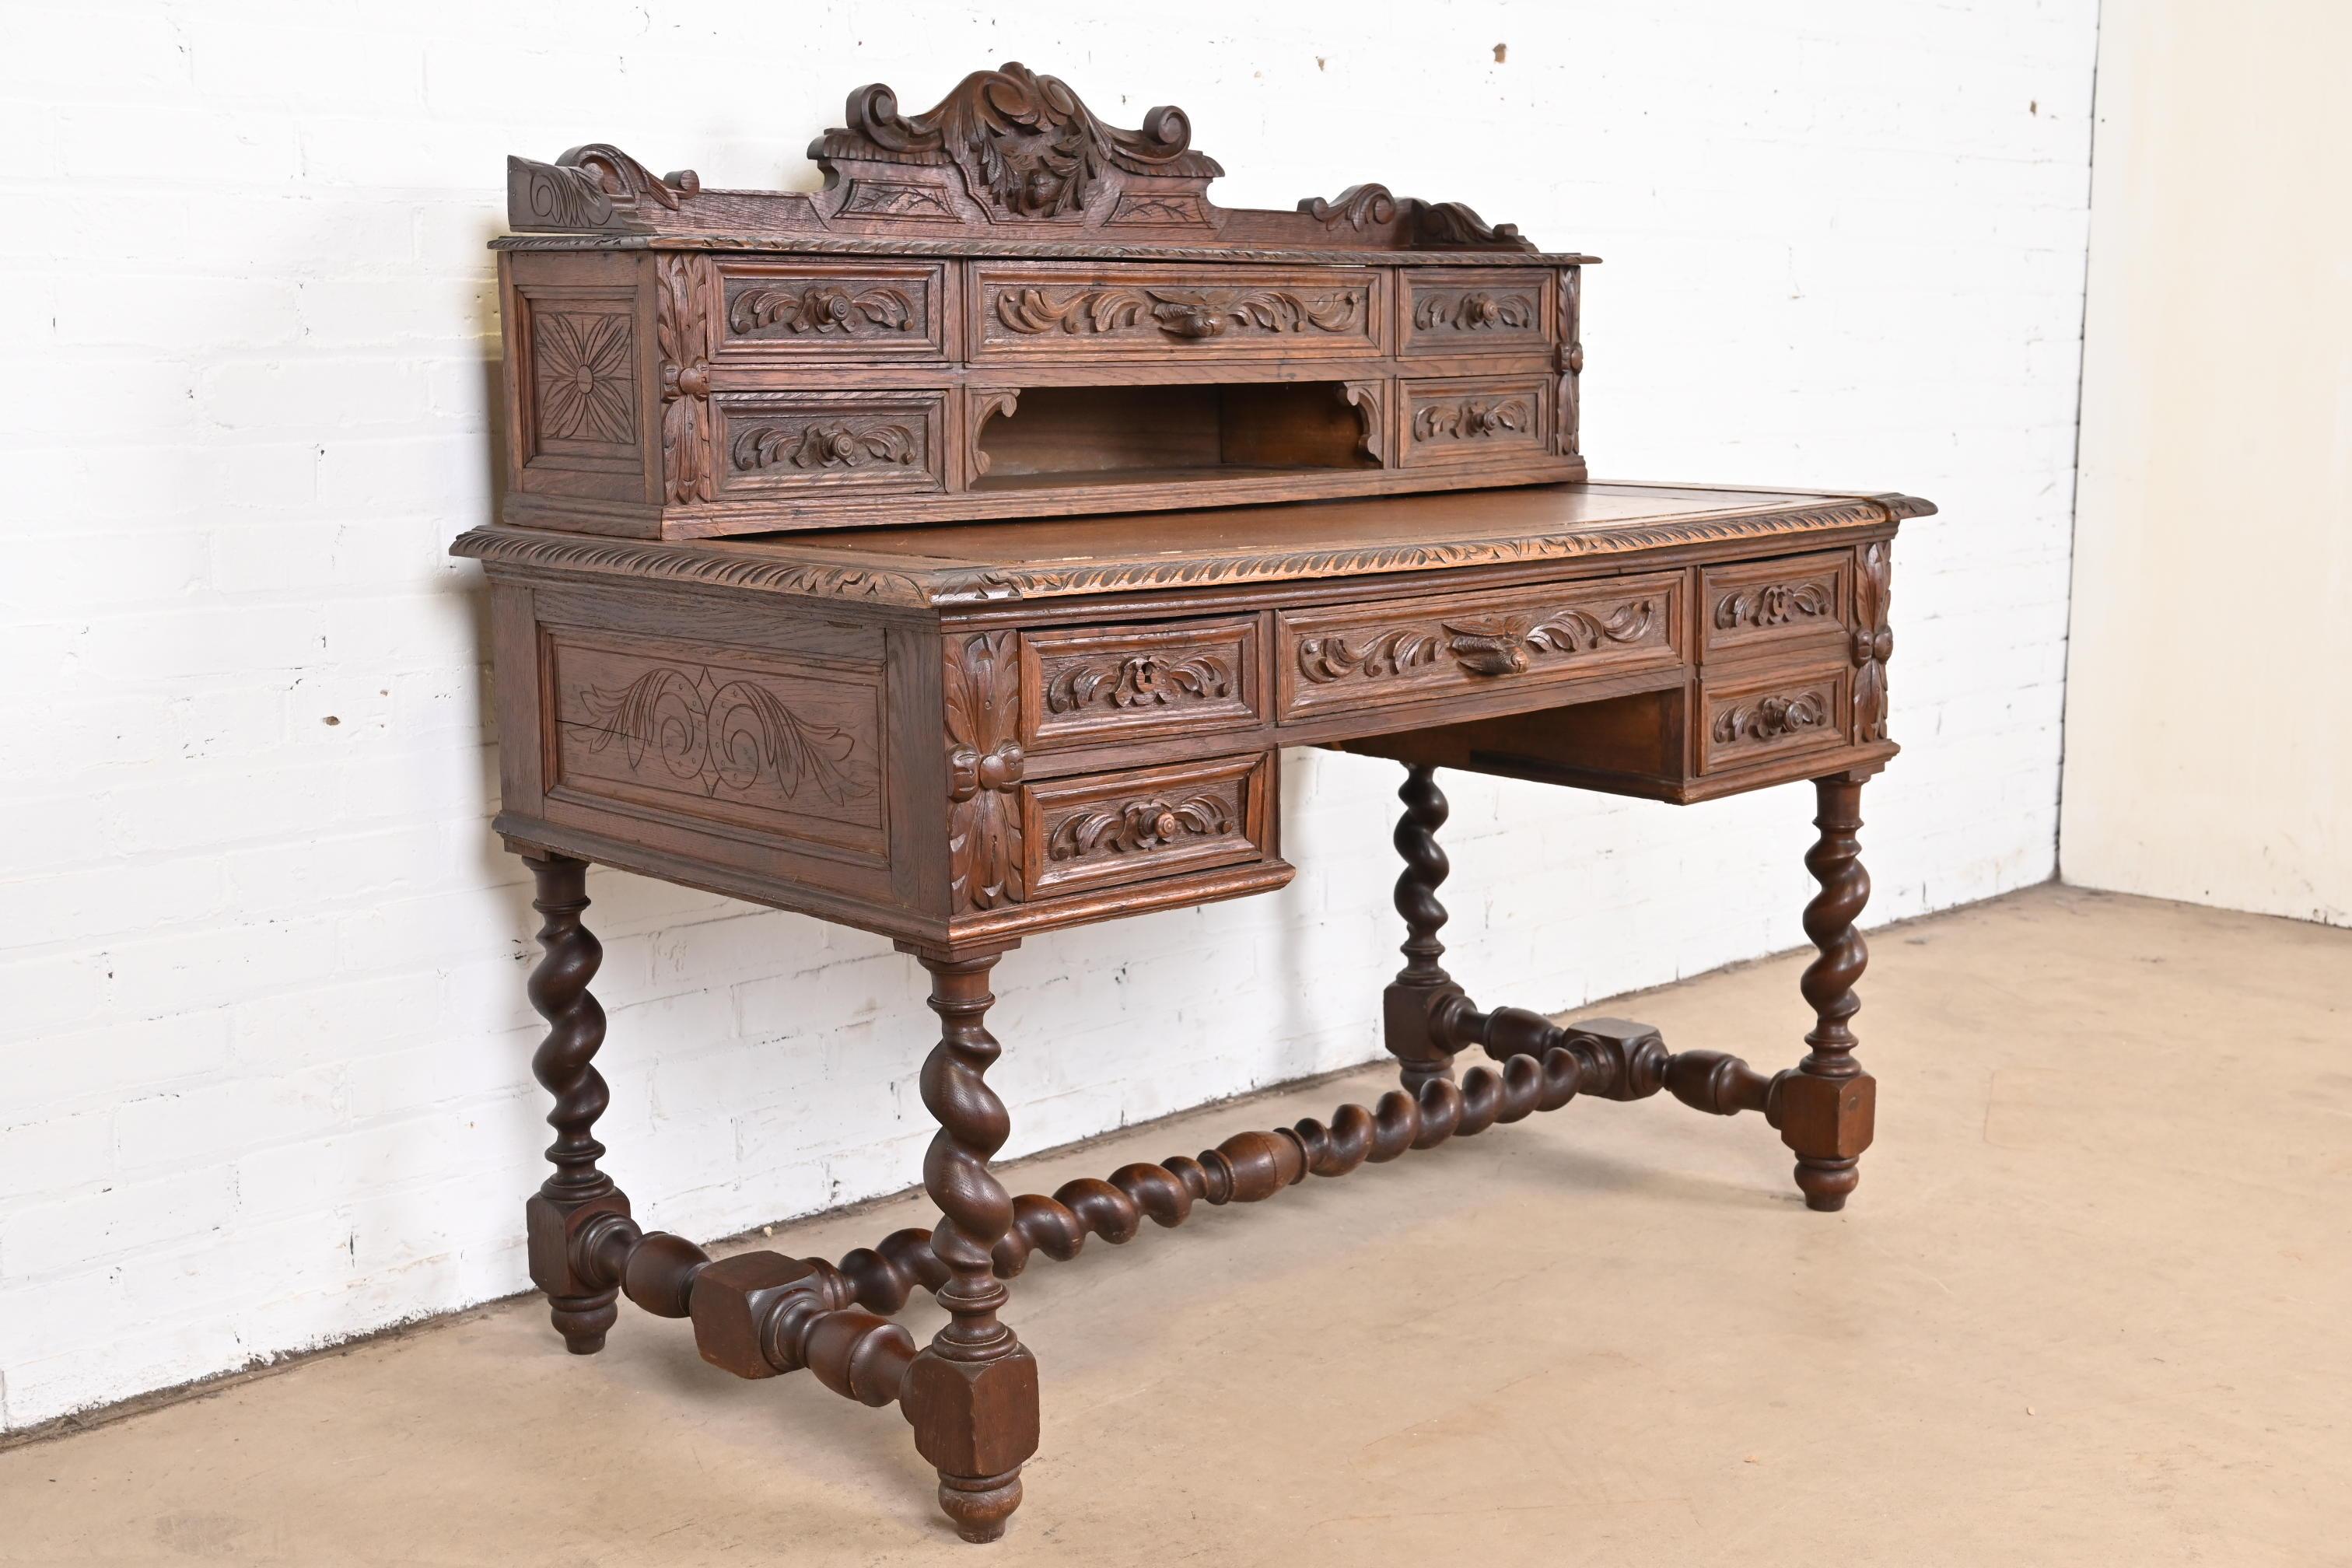 19th Century French Black Forest Carved Oak Writing Desk With Barley Twist Legs For Sale 3